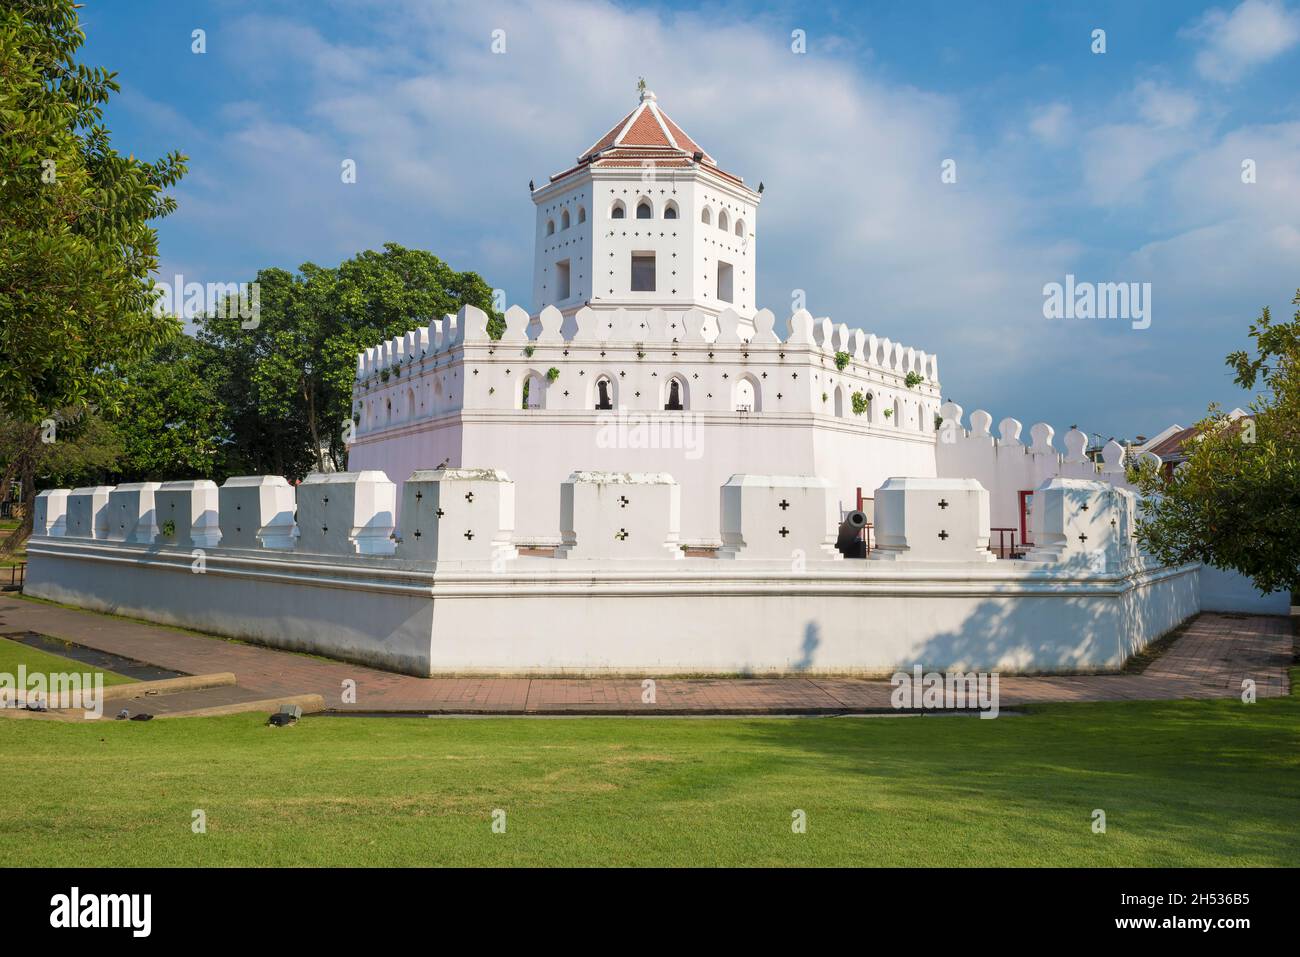 Old city fort of Phra Sumen close up on a sunny day. Bangkok, Thailand Stock Photo